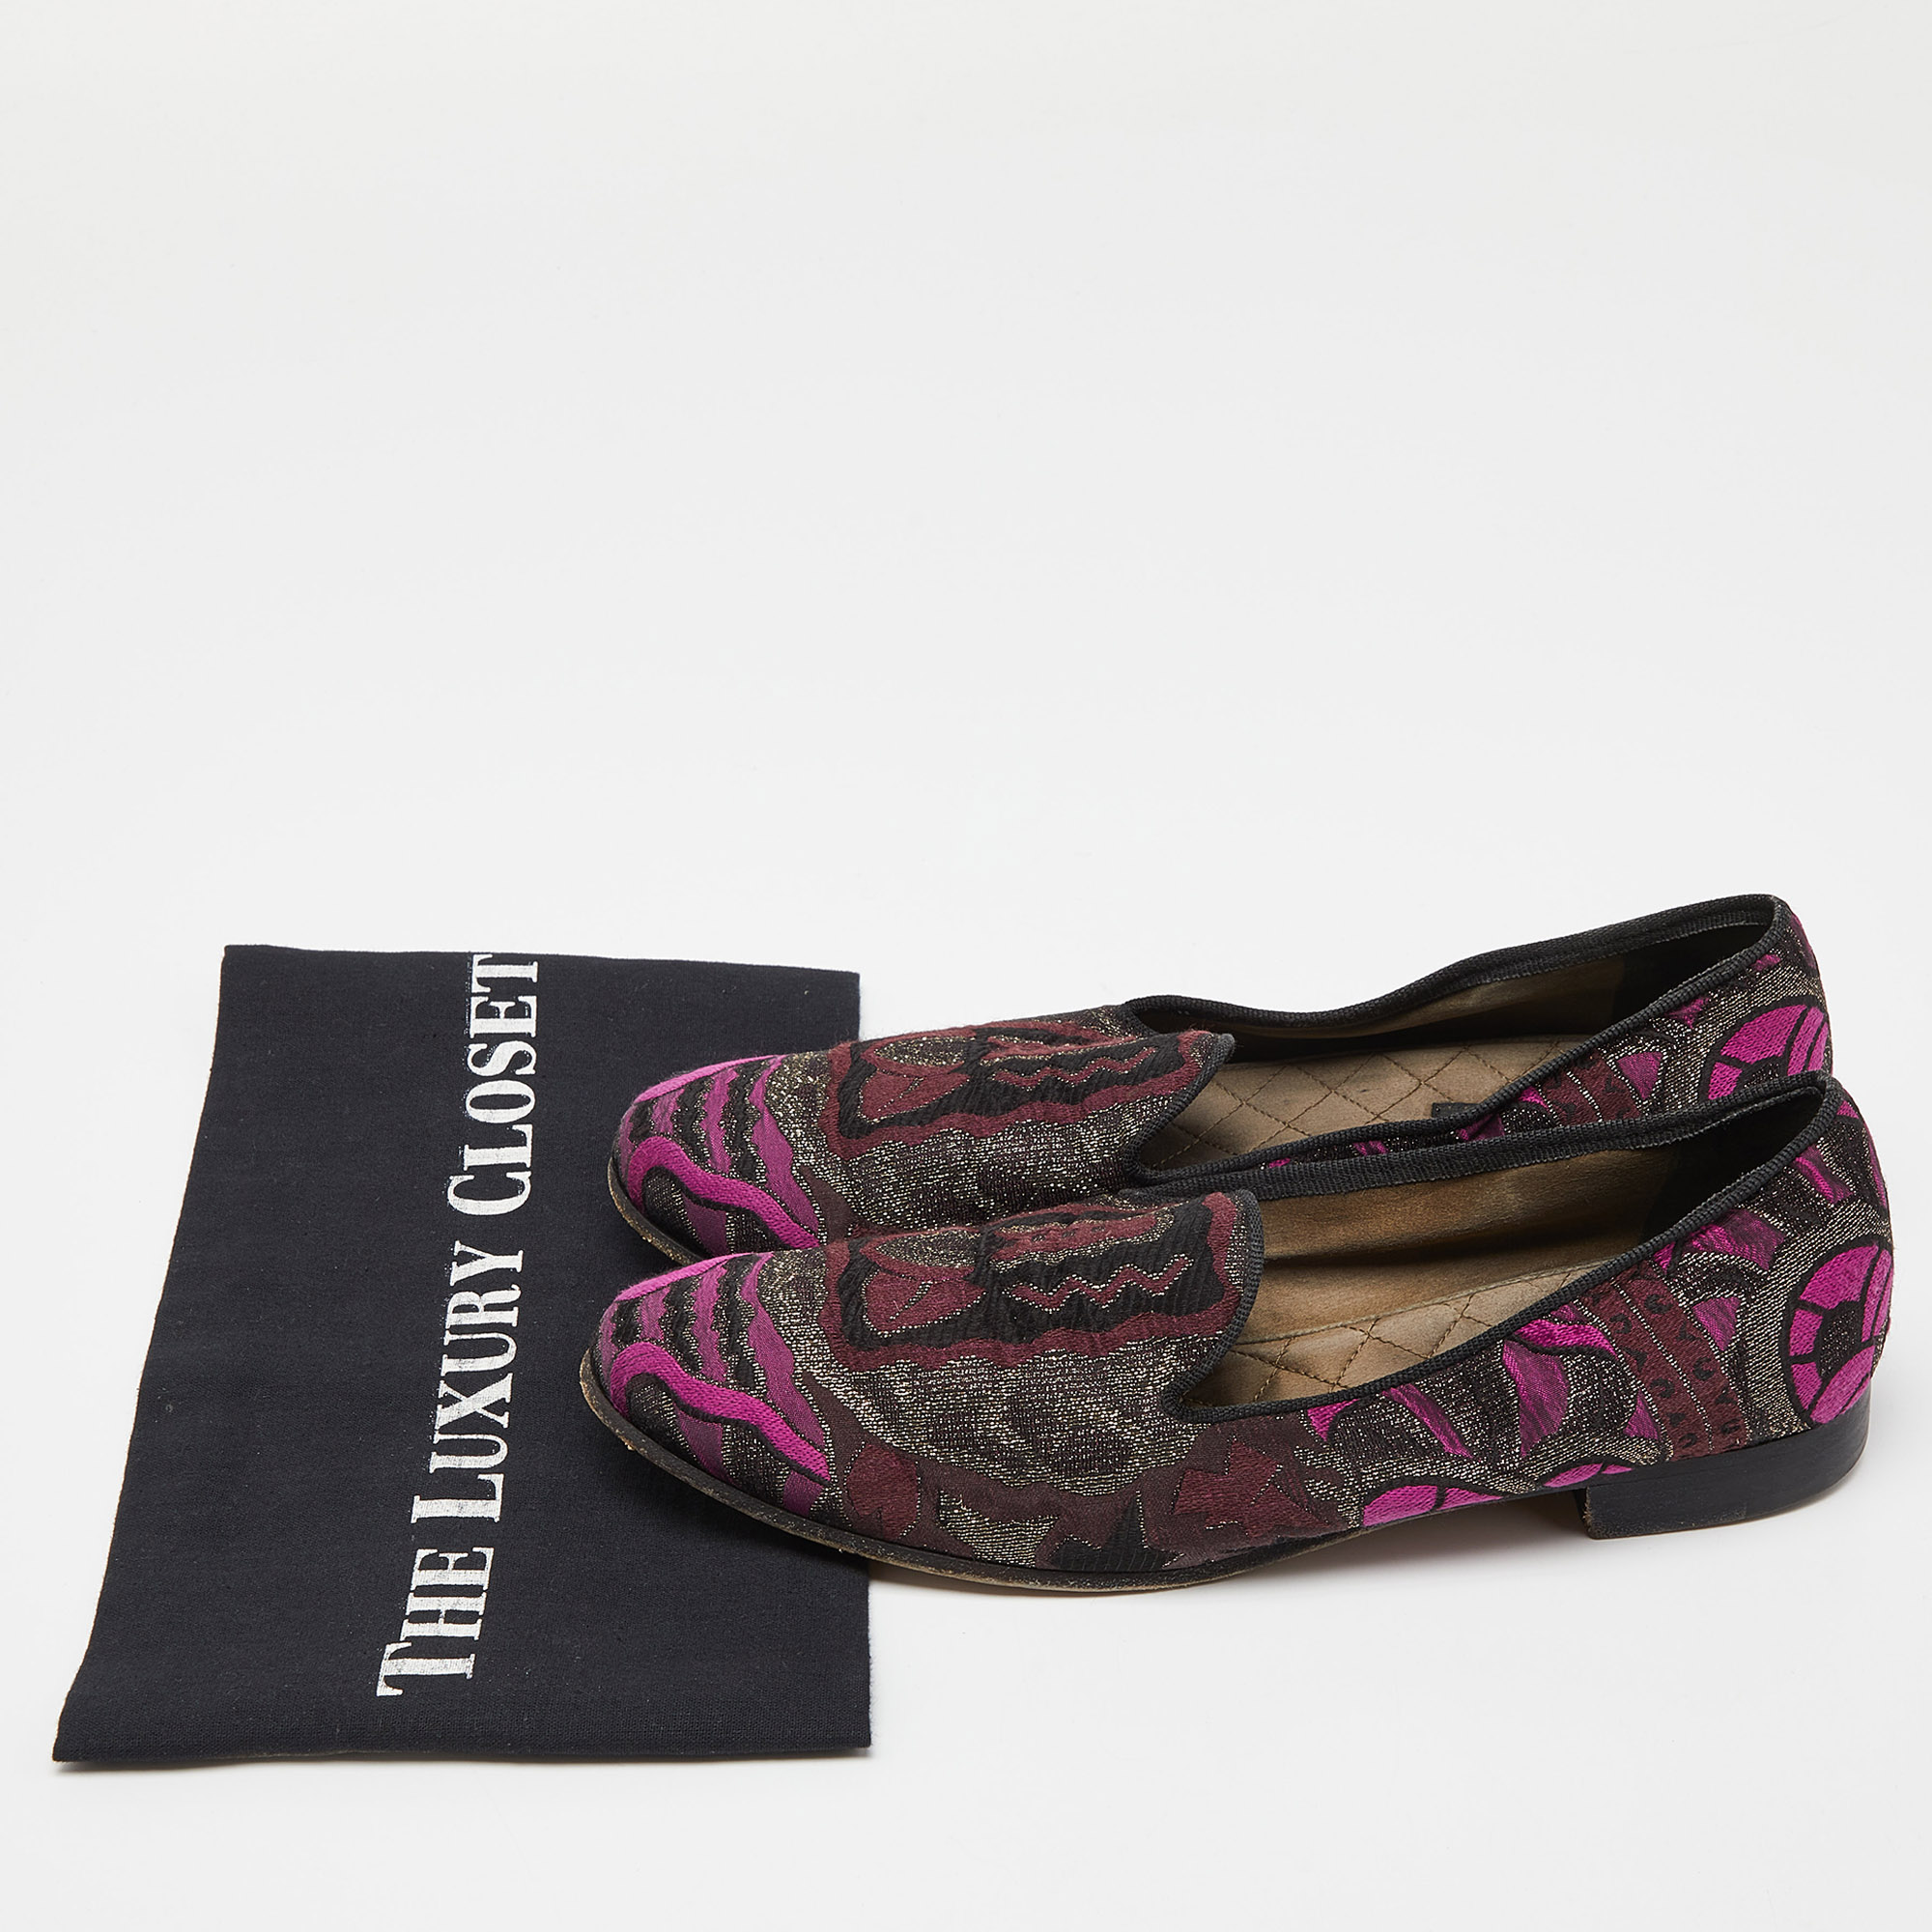 Etro Multicolor Embroidered Fabric Smoking Slippers Size 40